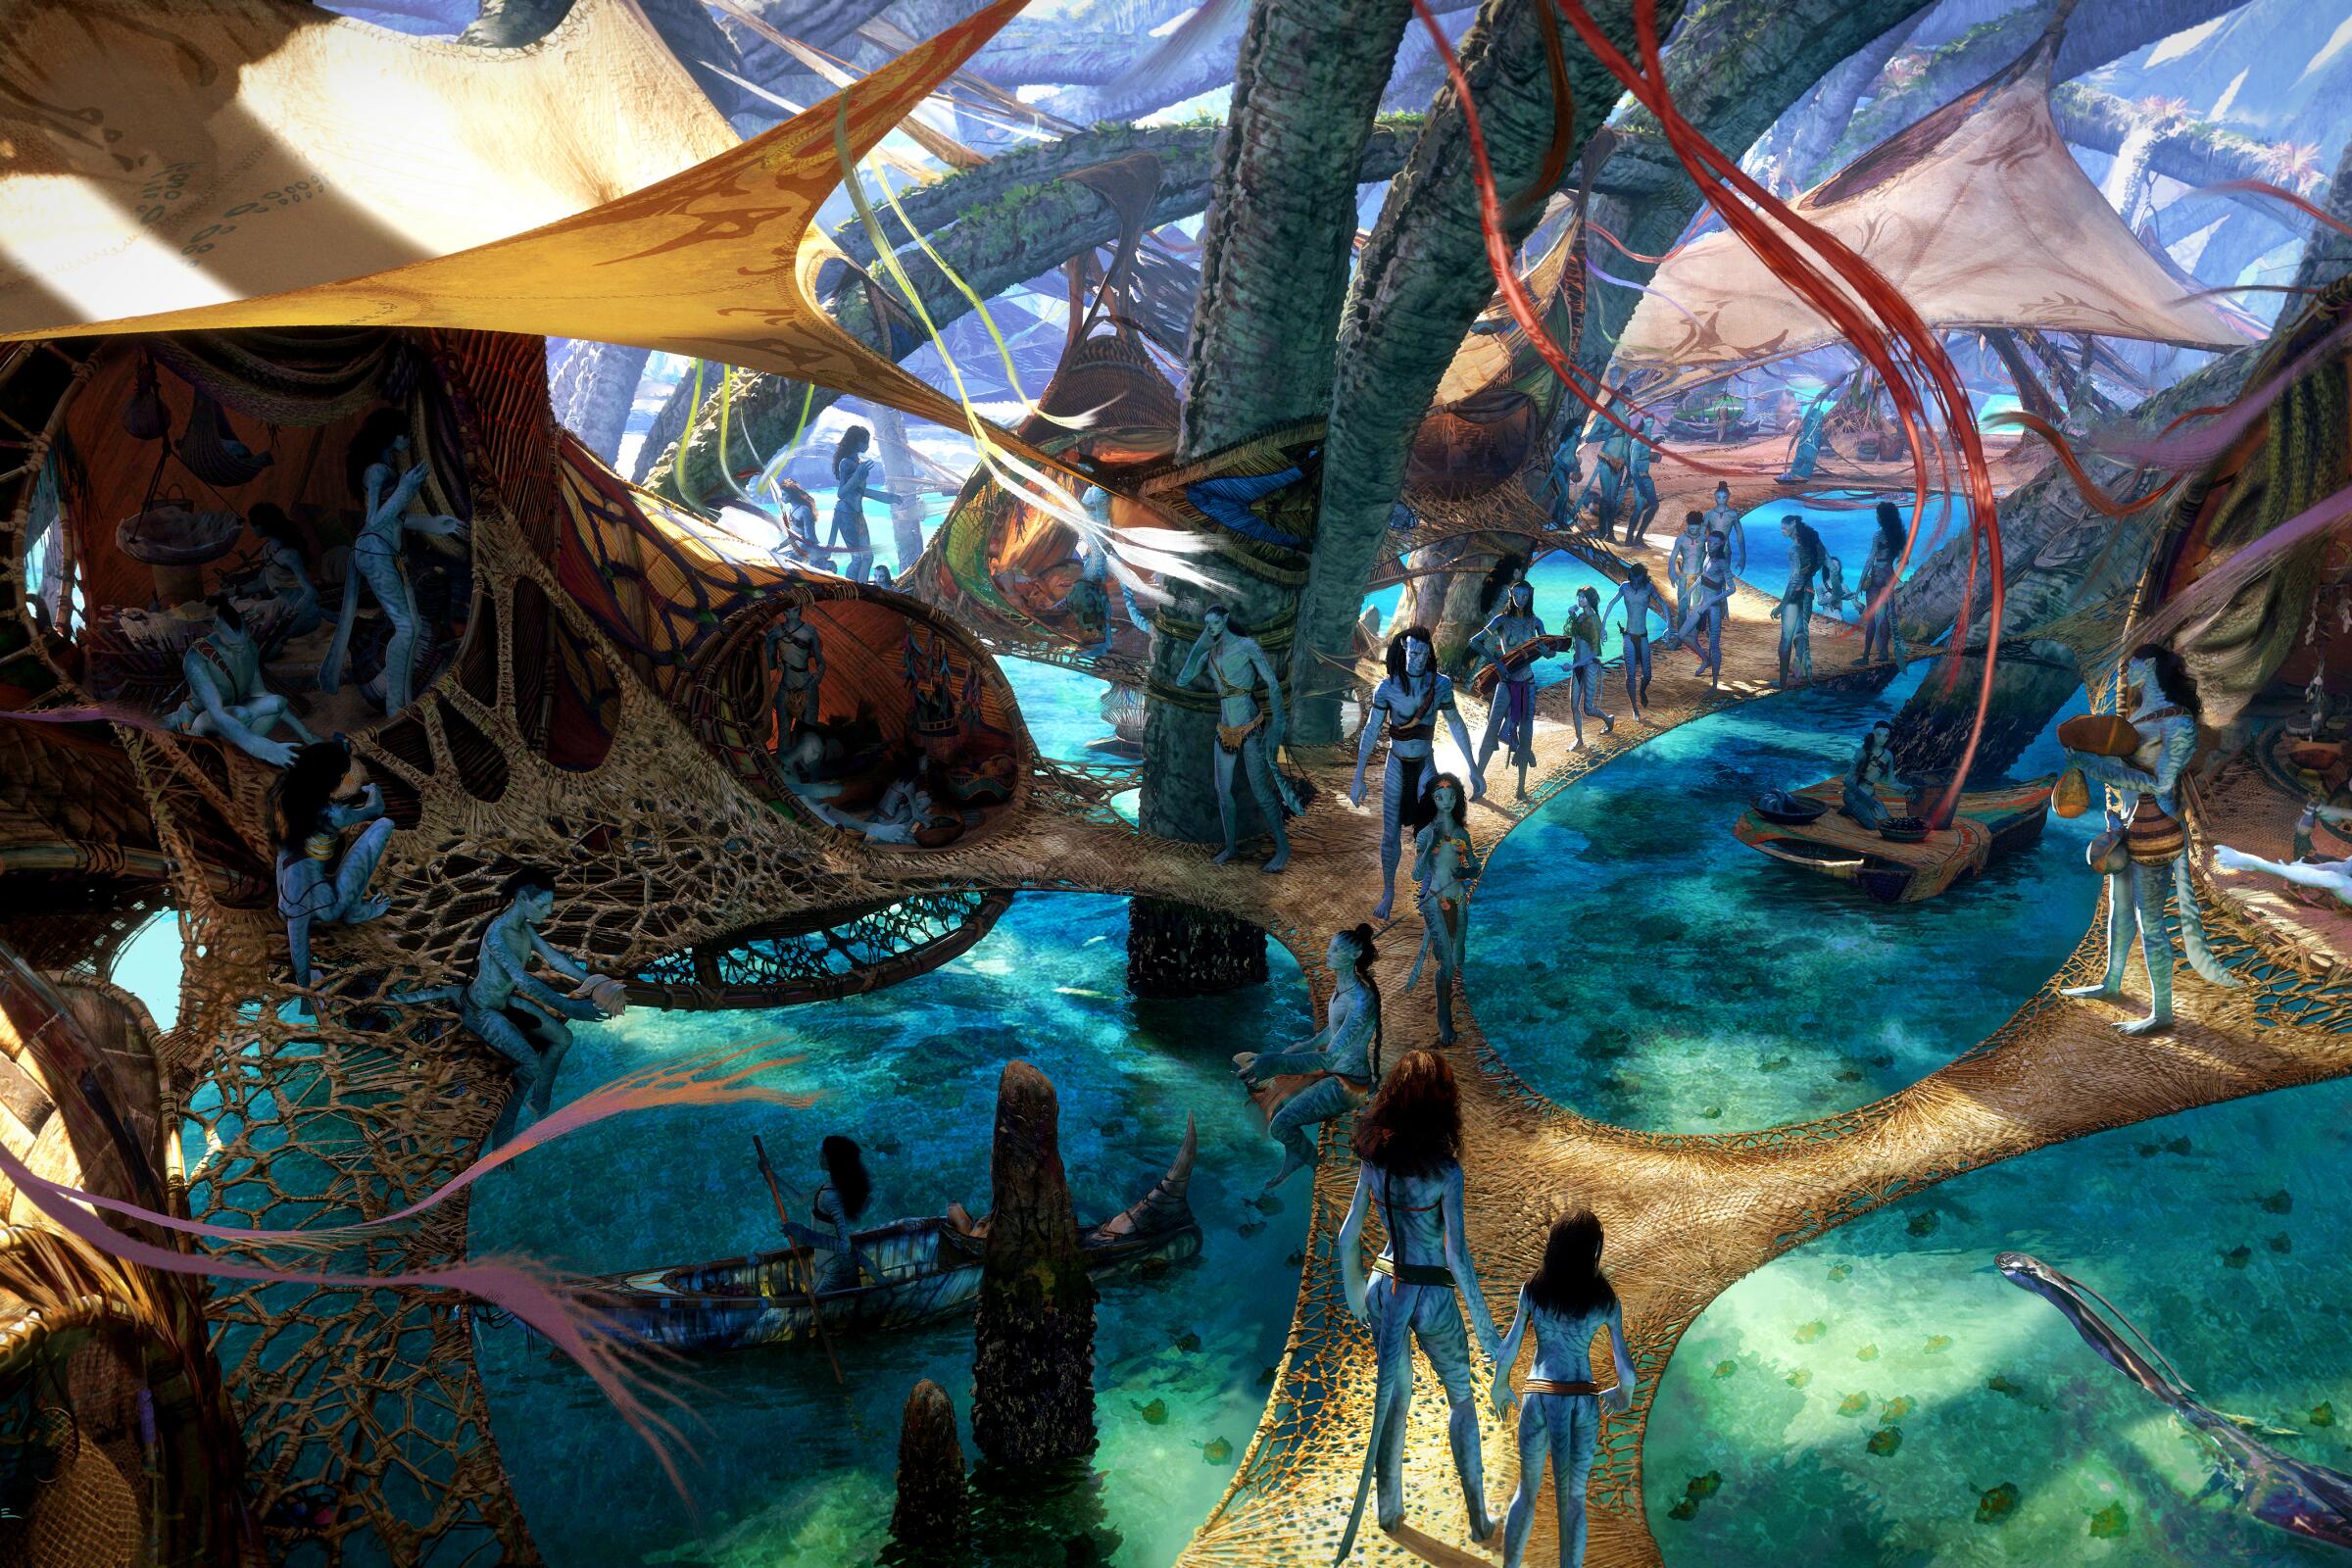 Concept art shows walkways and communal spaces suspended from the roots of giant trees for "Avatar: The Way of Water."